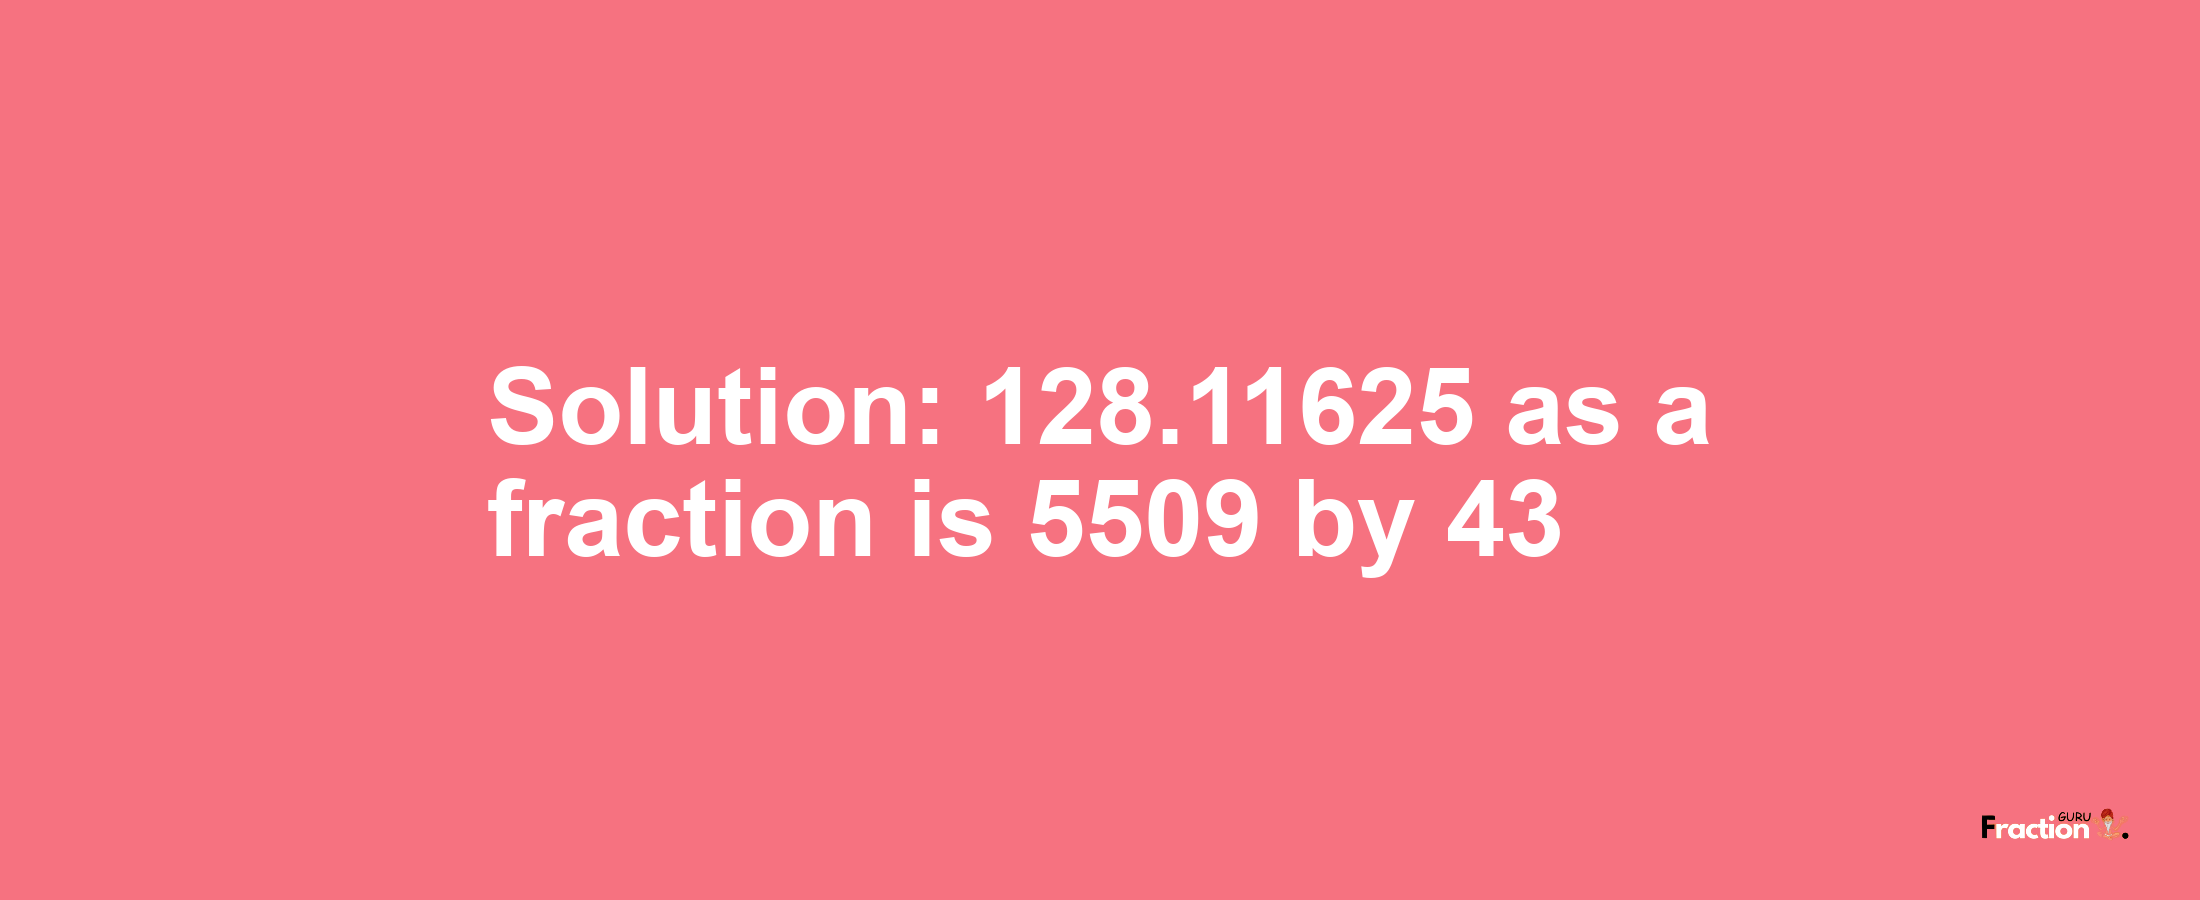 Solution:128.11625 as a fraction is 5509/43